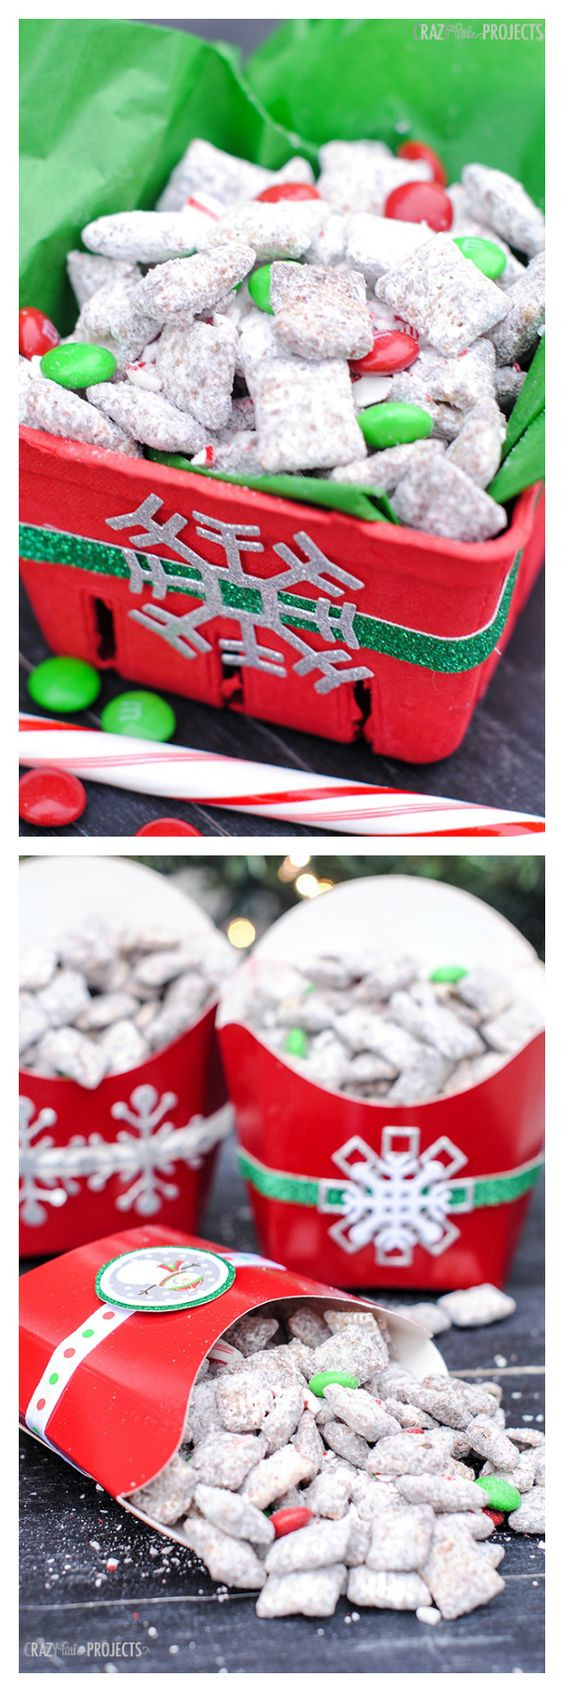 Cute Christmas Candy
 Chocolate can s Muddy bud s recipe and Candy canes on